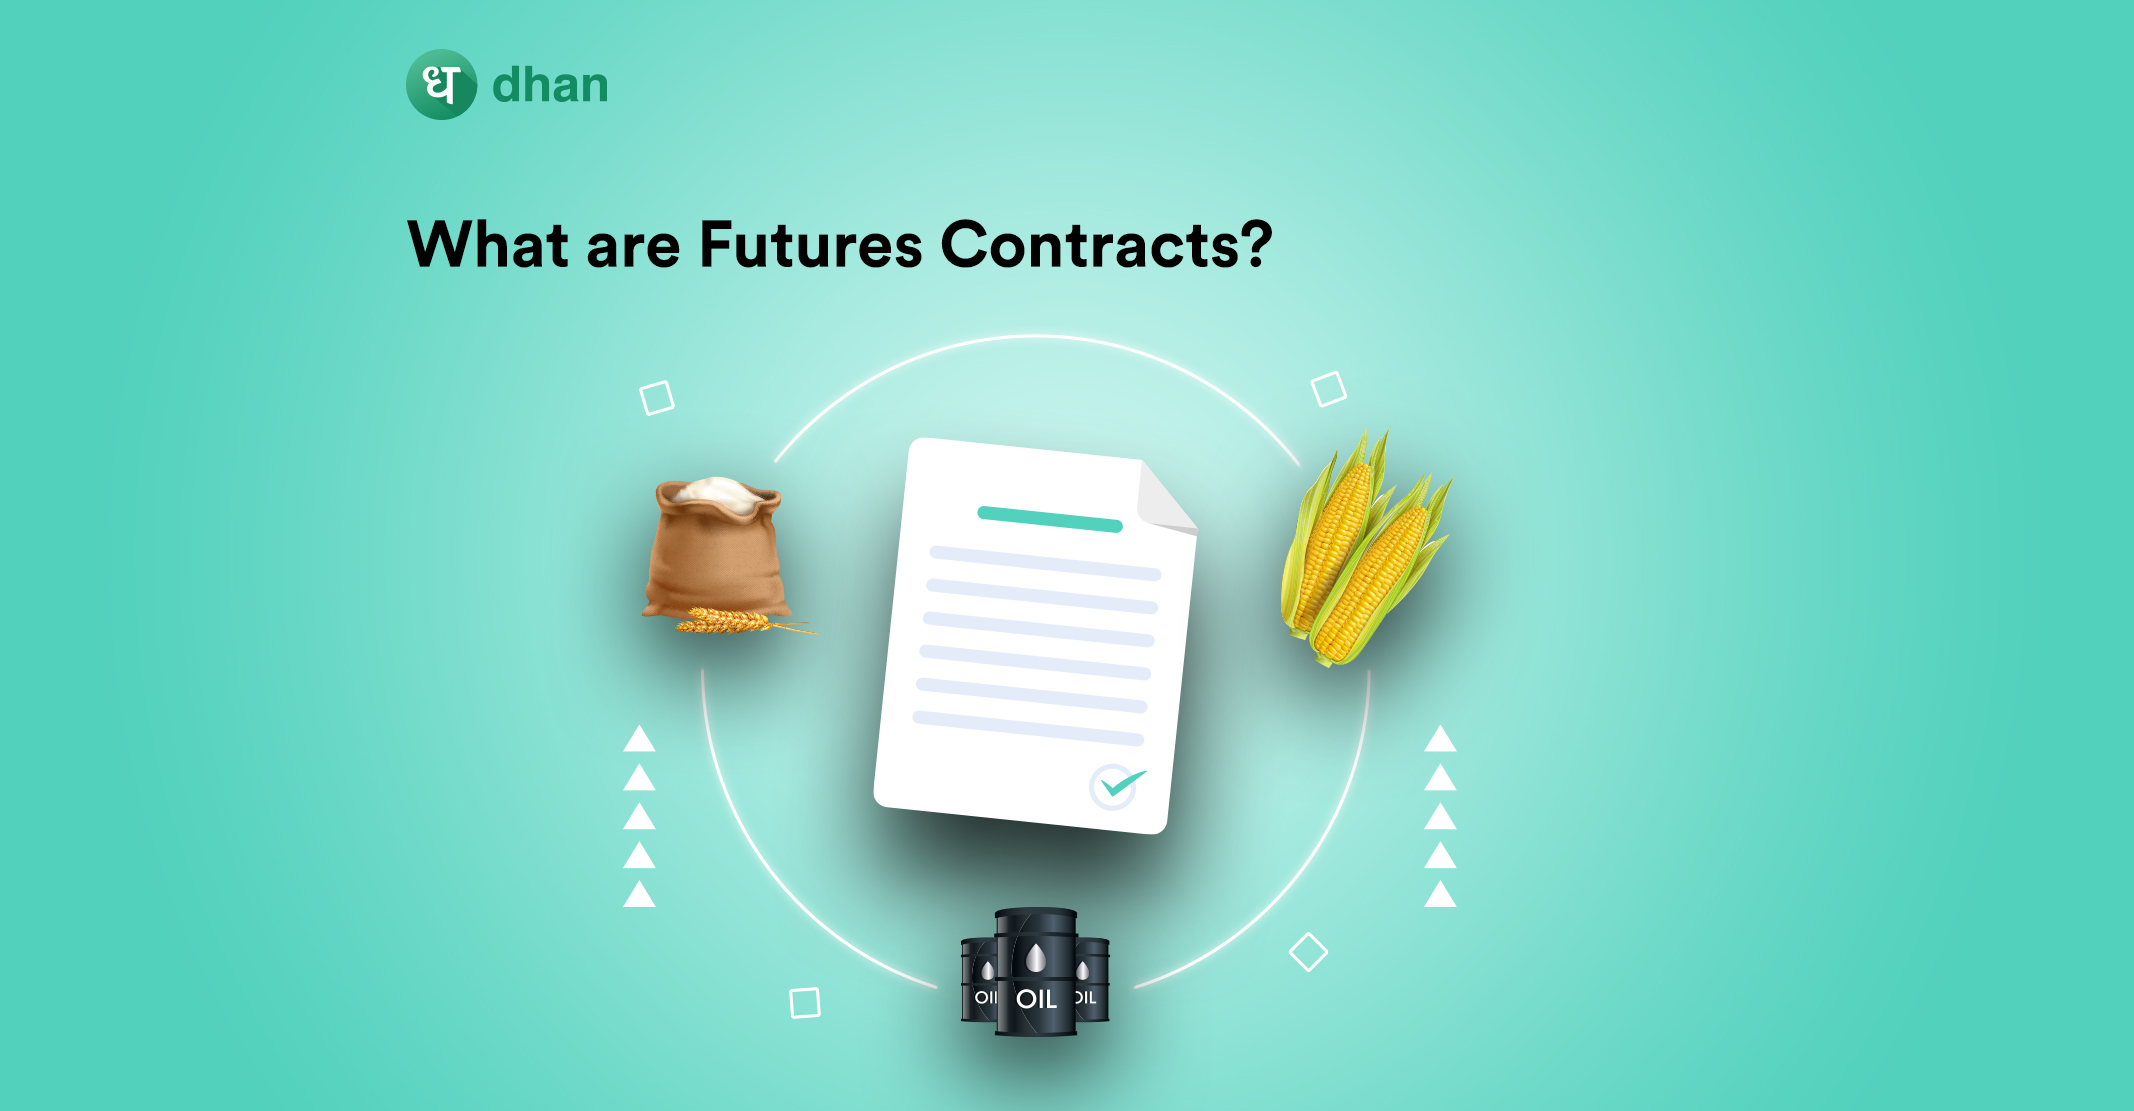 What are Futures Contracts